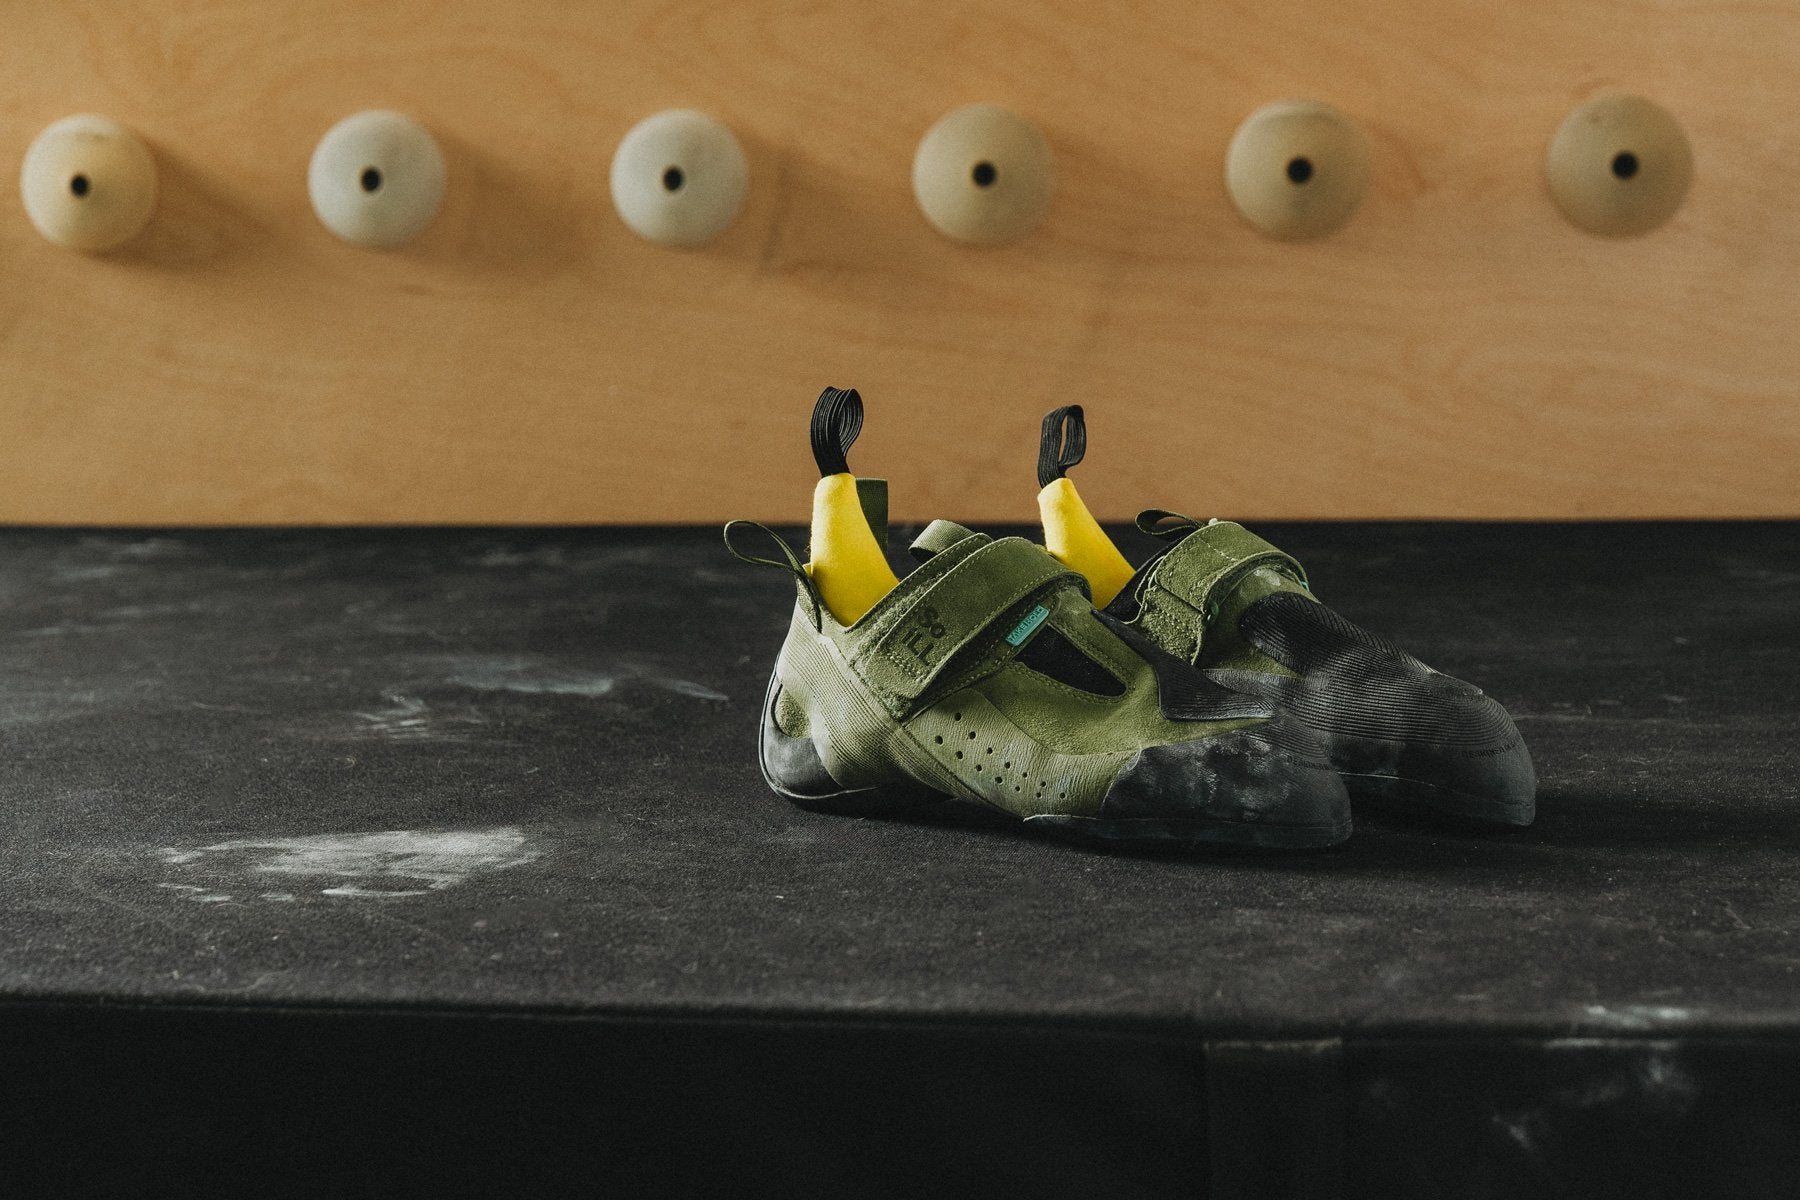 Boot Banana deodorizing shoe inserts are shown in a pair of So ilL rock climbing shoes